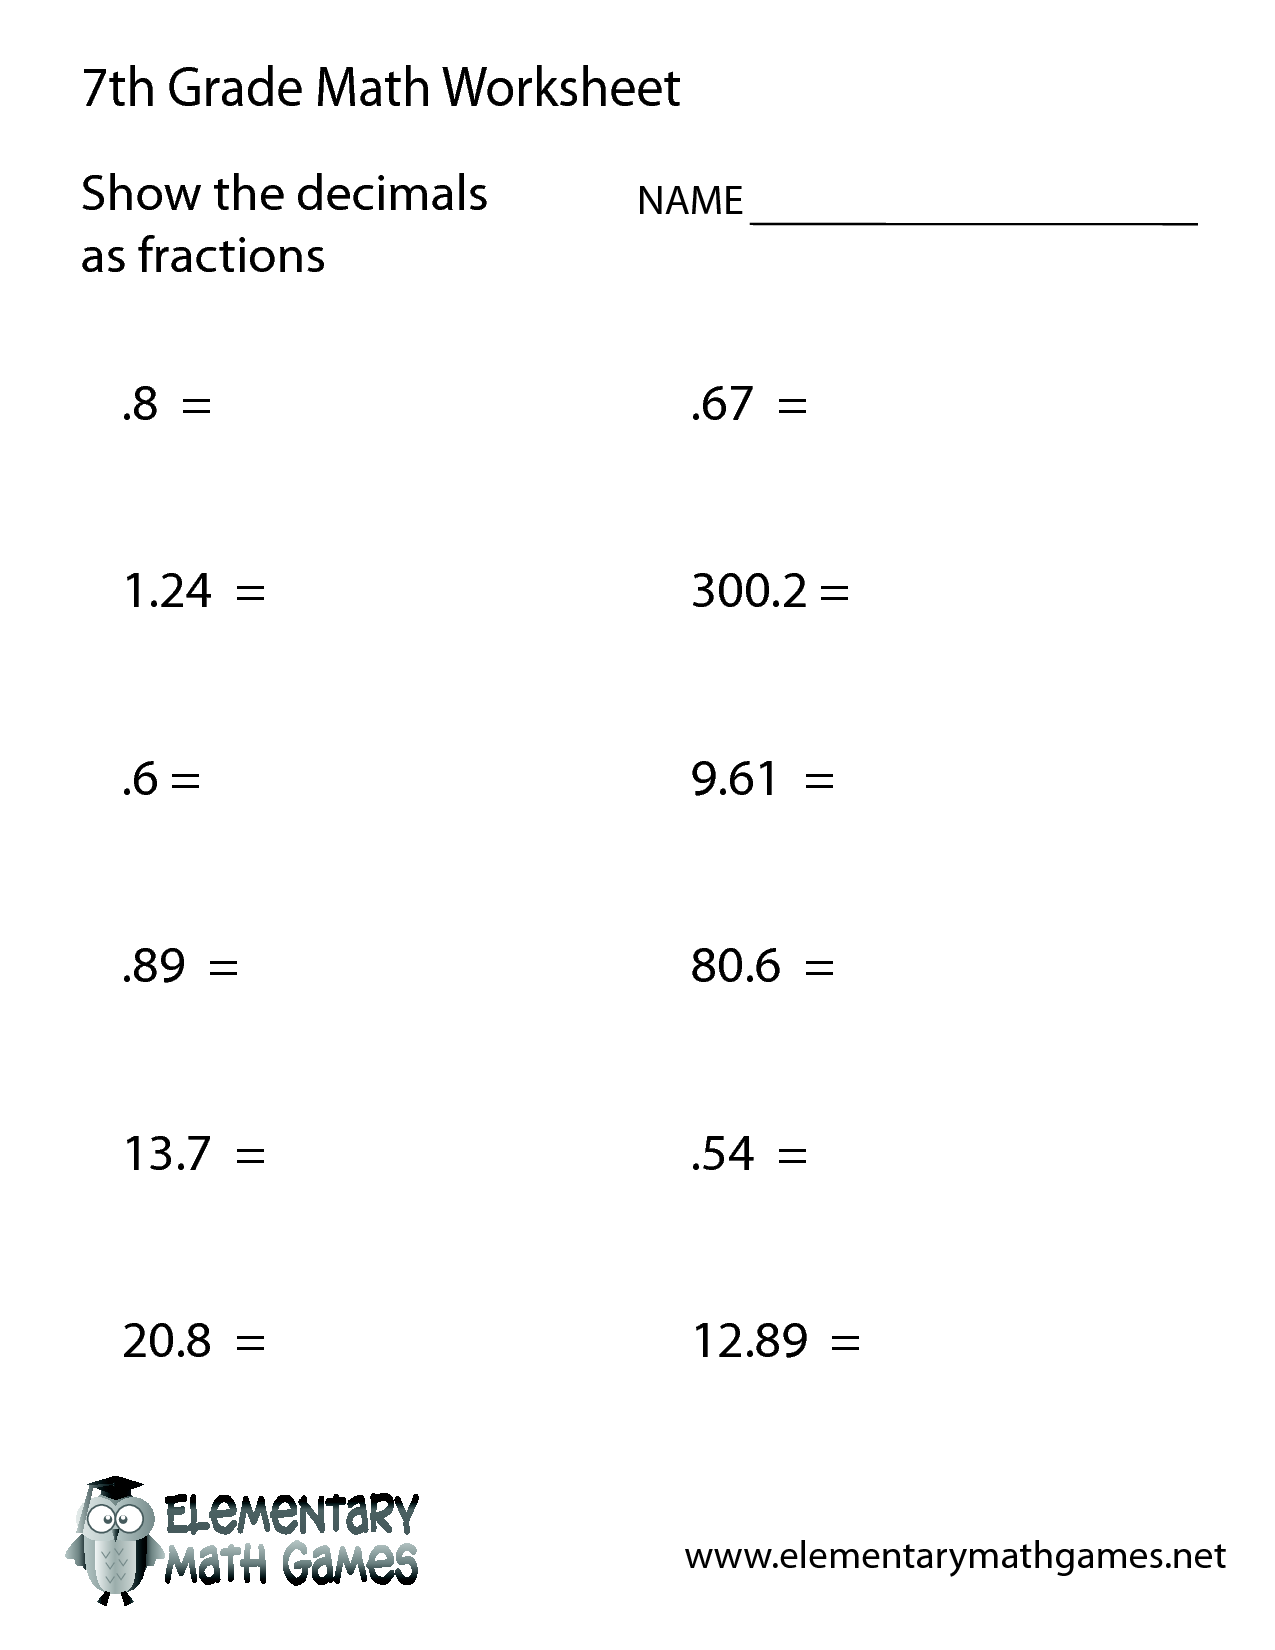 7th Grade Math Problems Worksheets Image